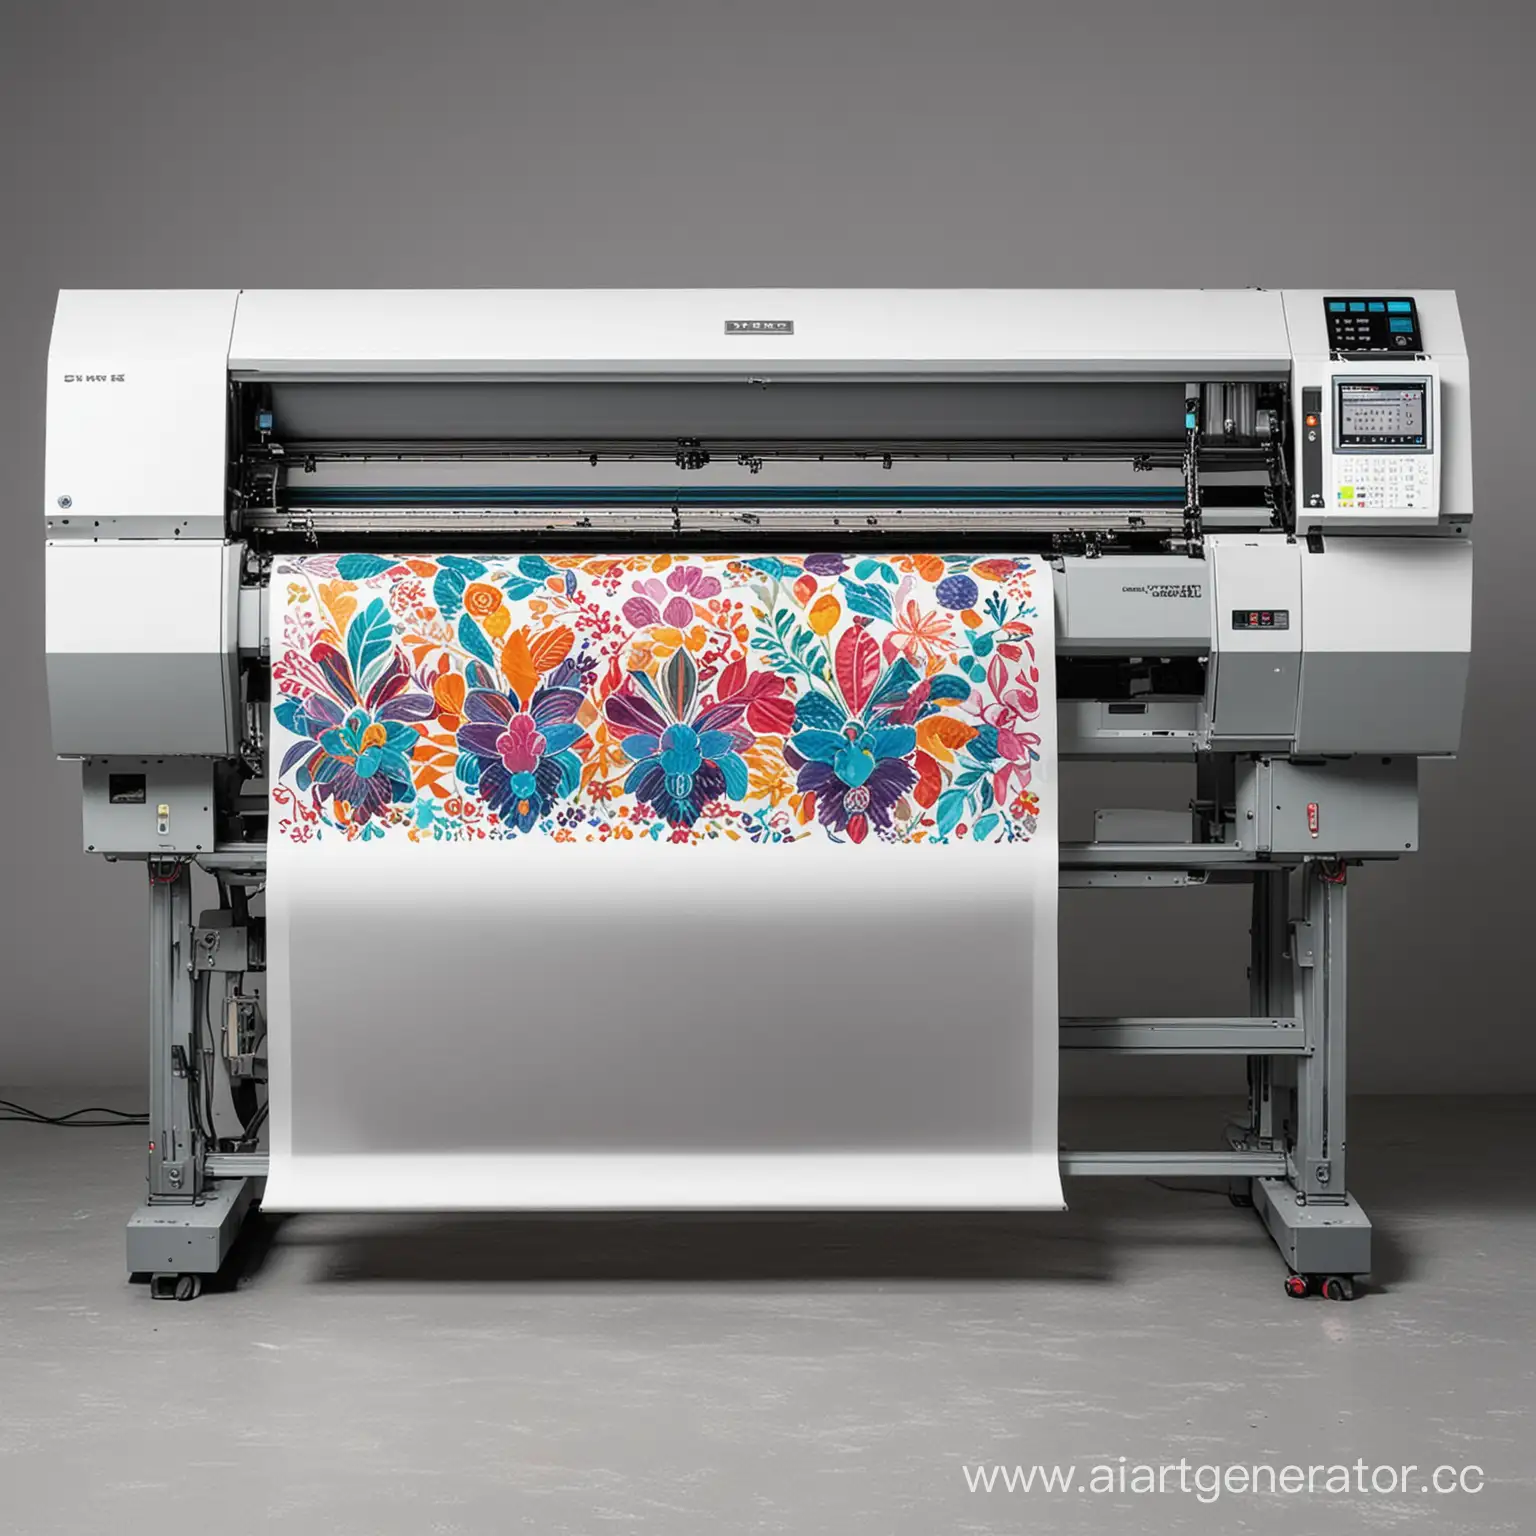 Vibrant-Colorful-Industrial-Textile-Printer-in-Action